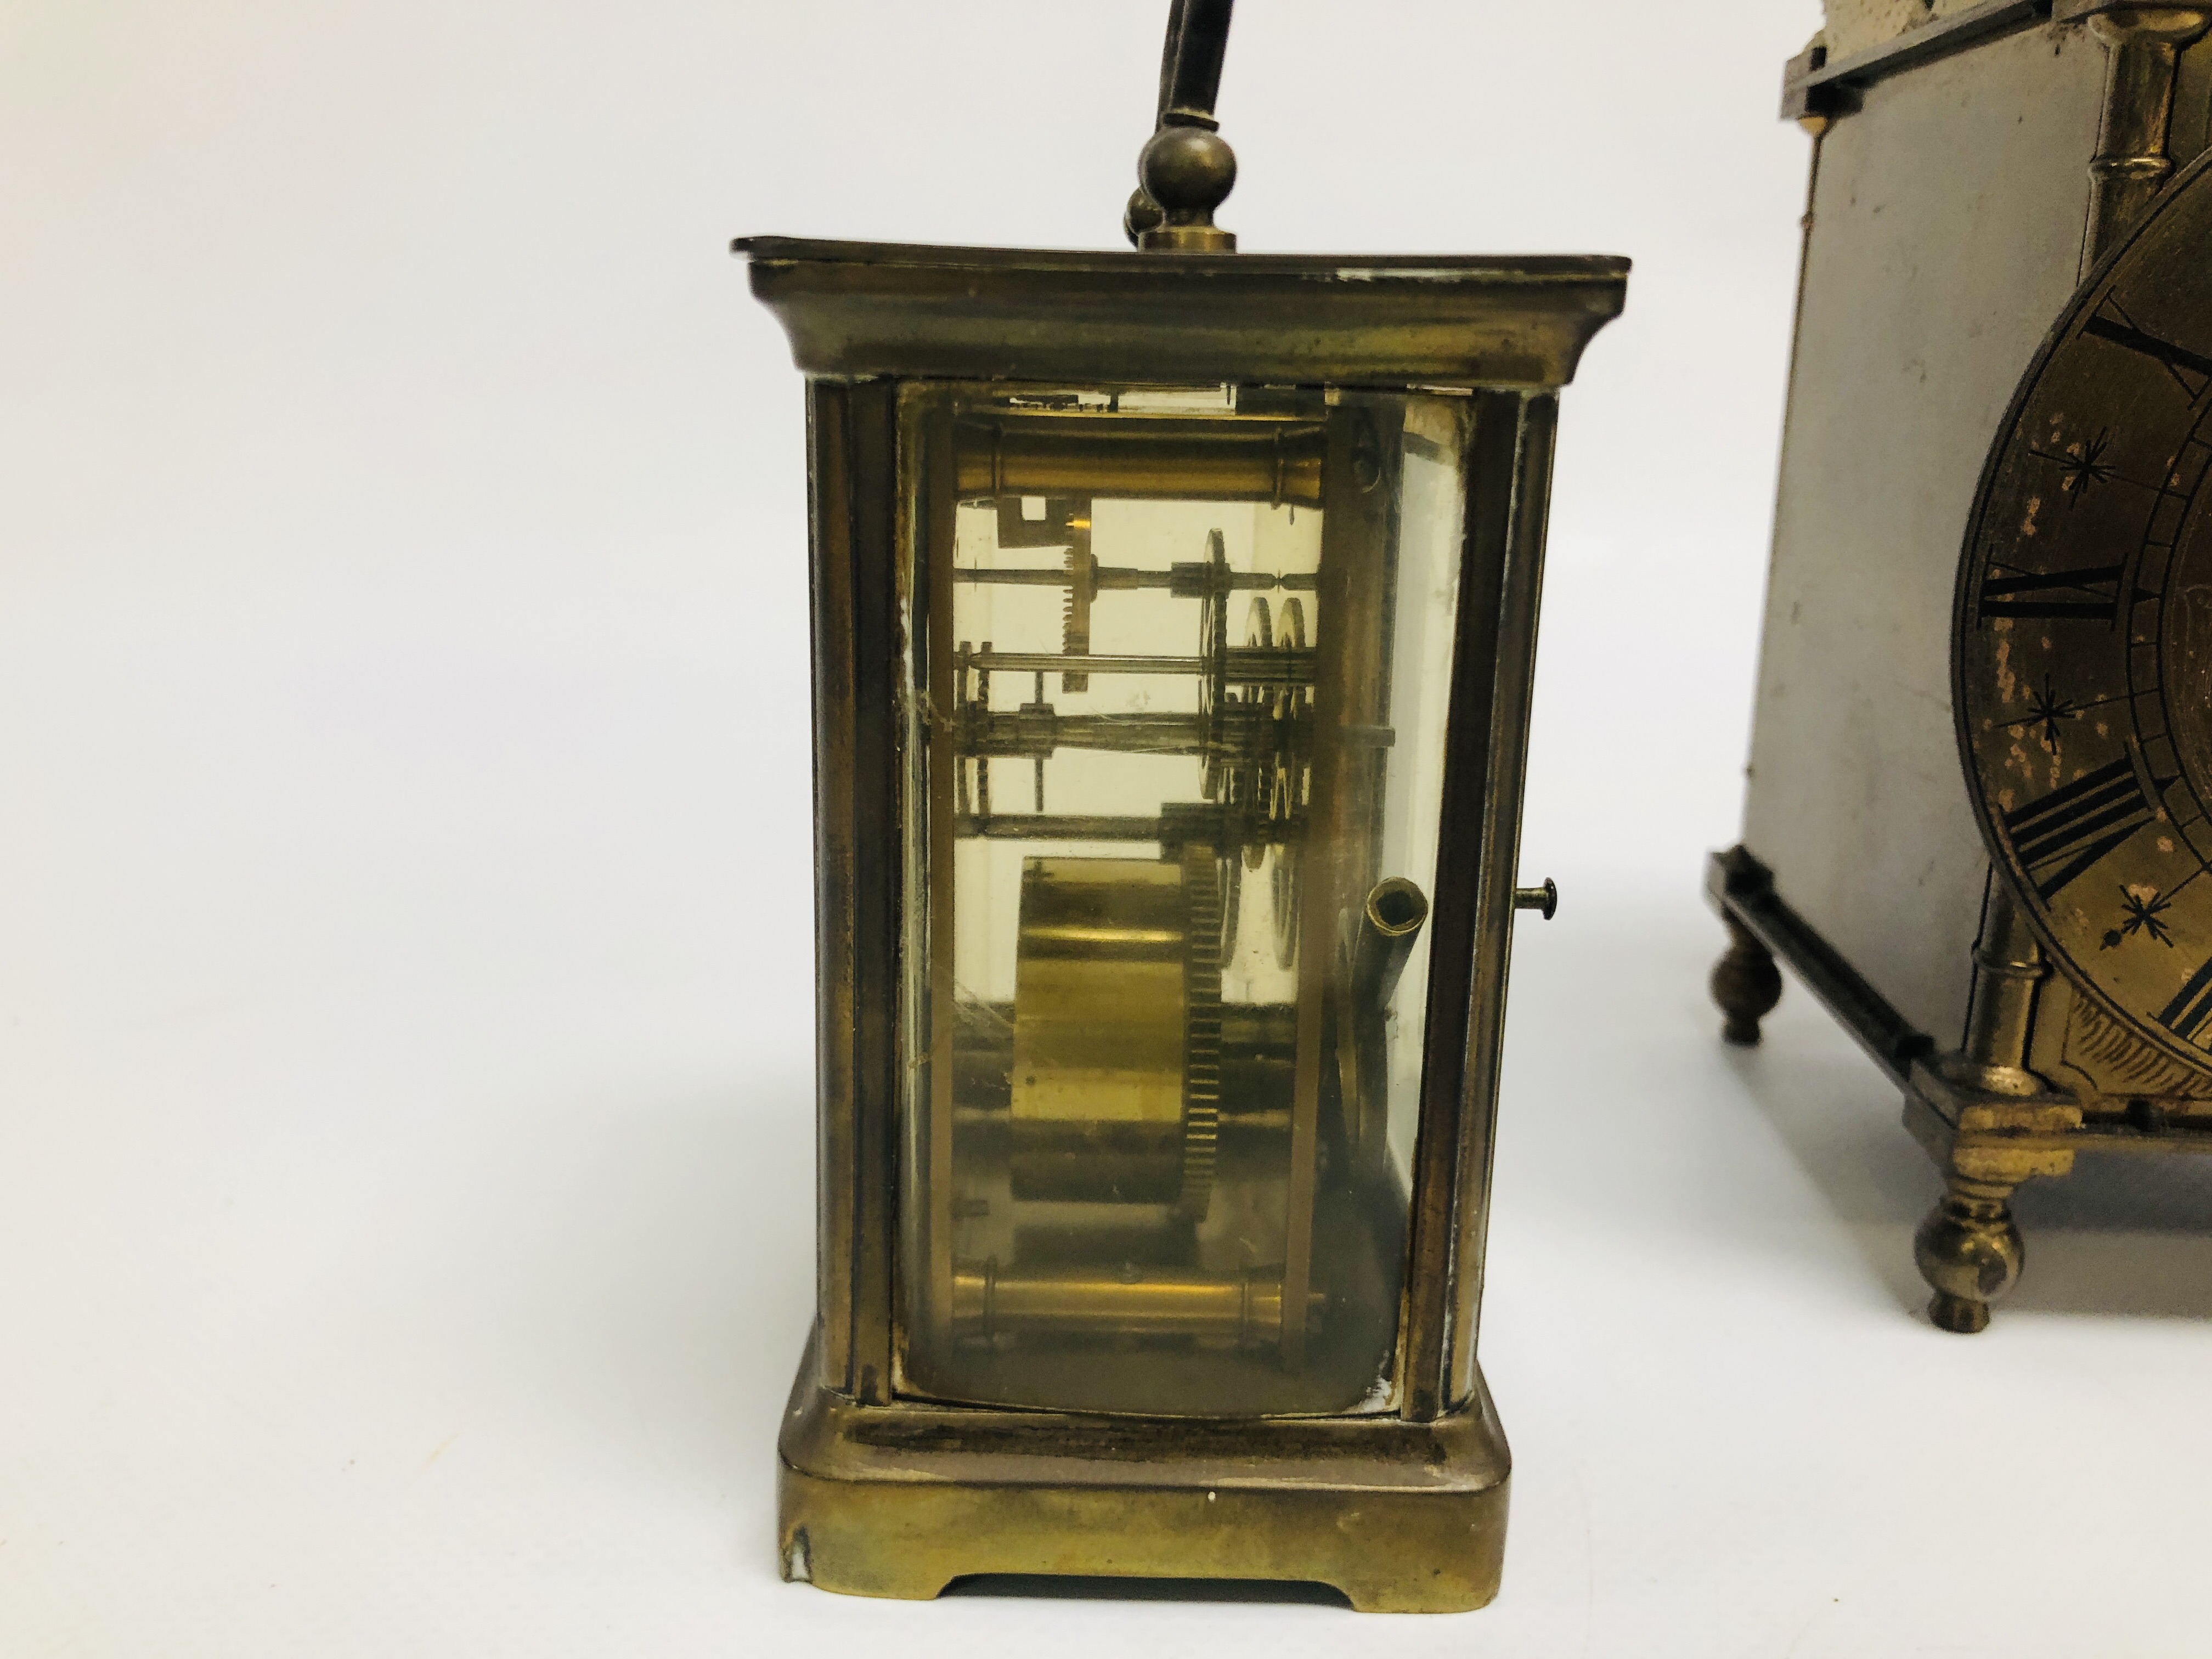 A FRENCH CARRIAGE CLOCK, THE FACE BEING PLASTIC + A MANTEL CLOCK OF LANTERN FORM. - Image 4 of 12